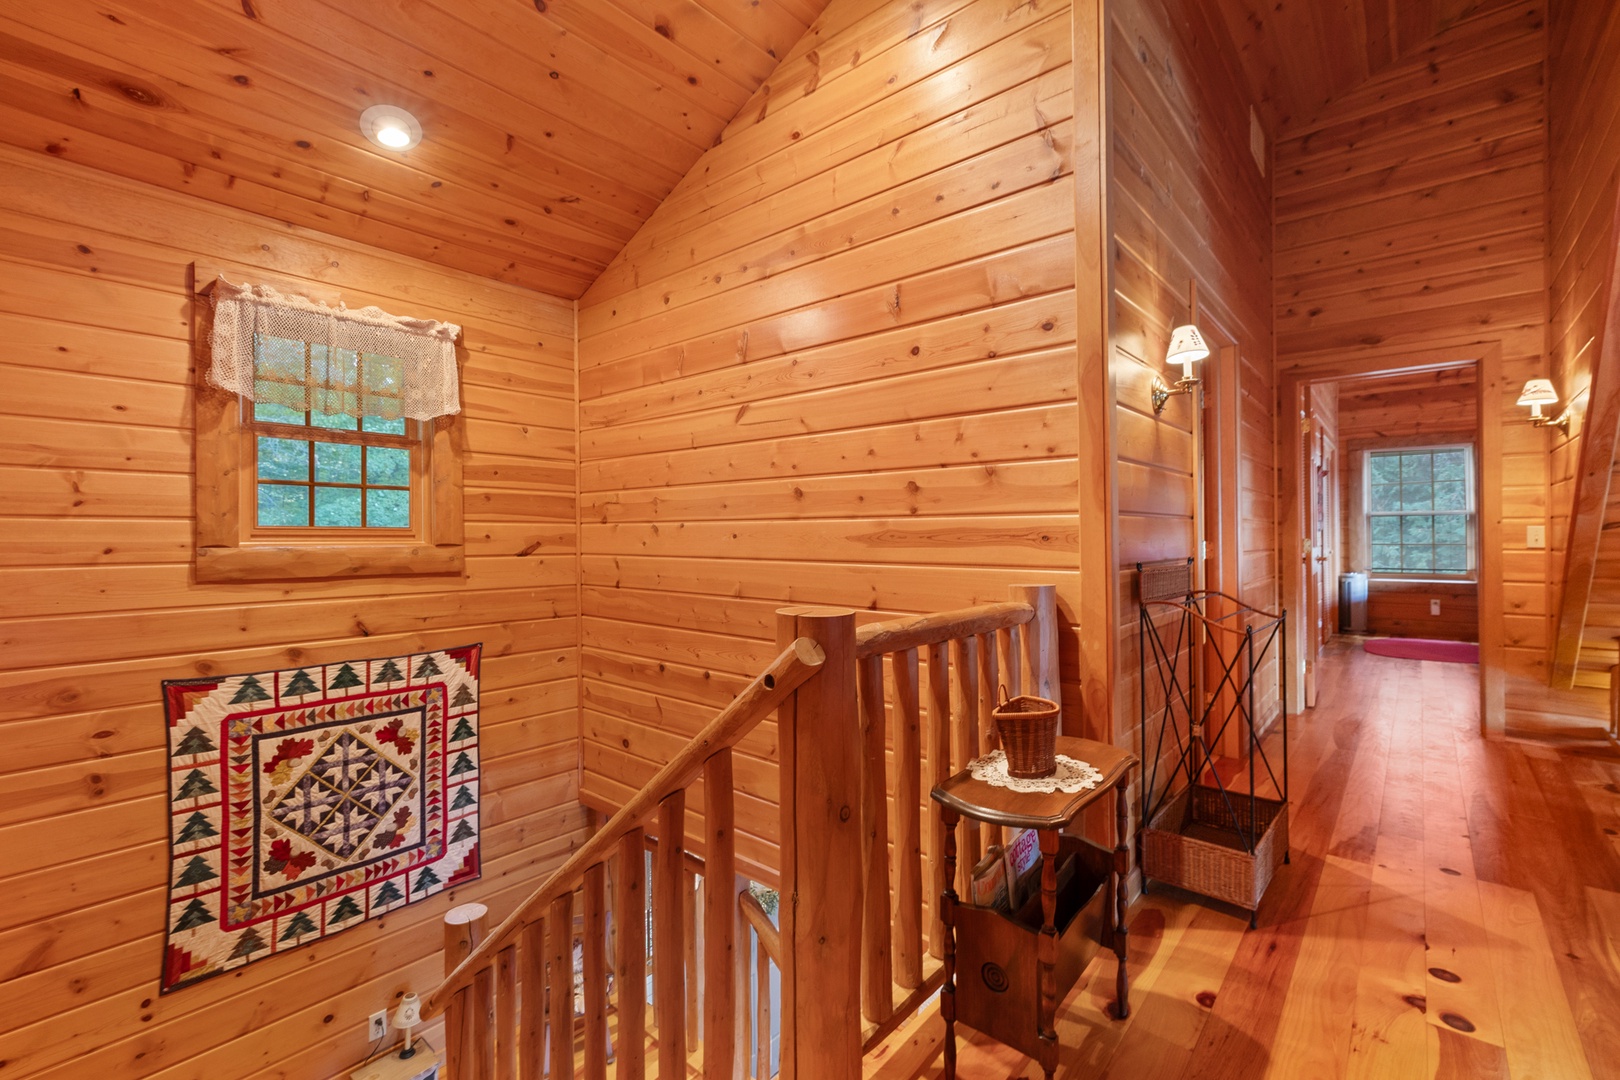 Walking through the upstairs loft you’ll find rustic decor and charming bedrooms.